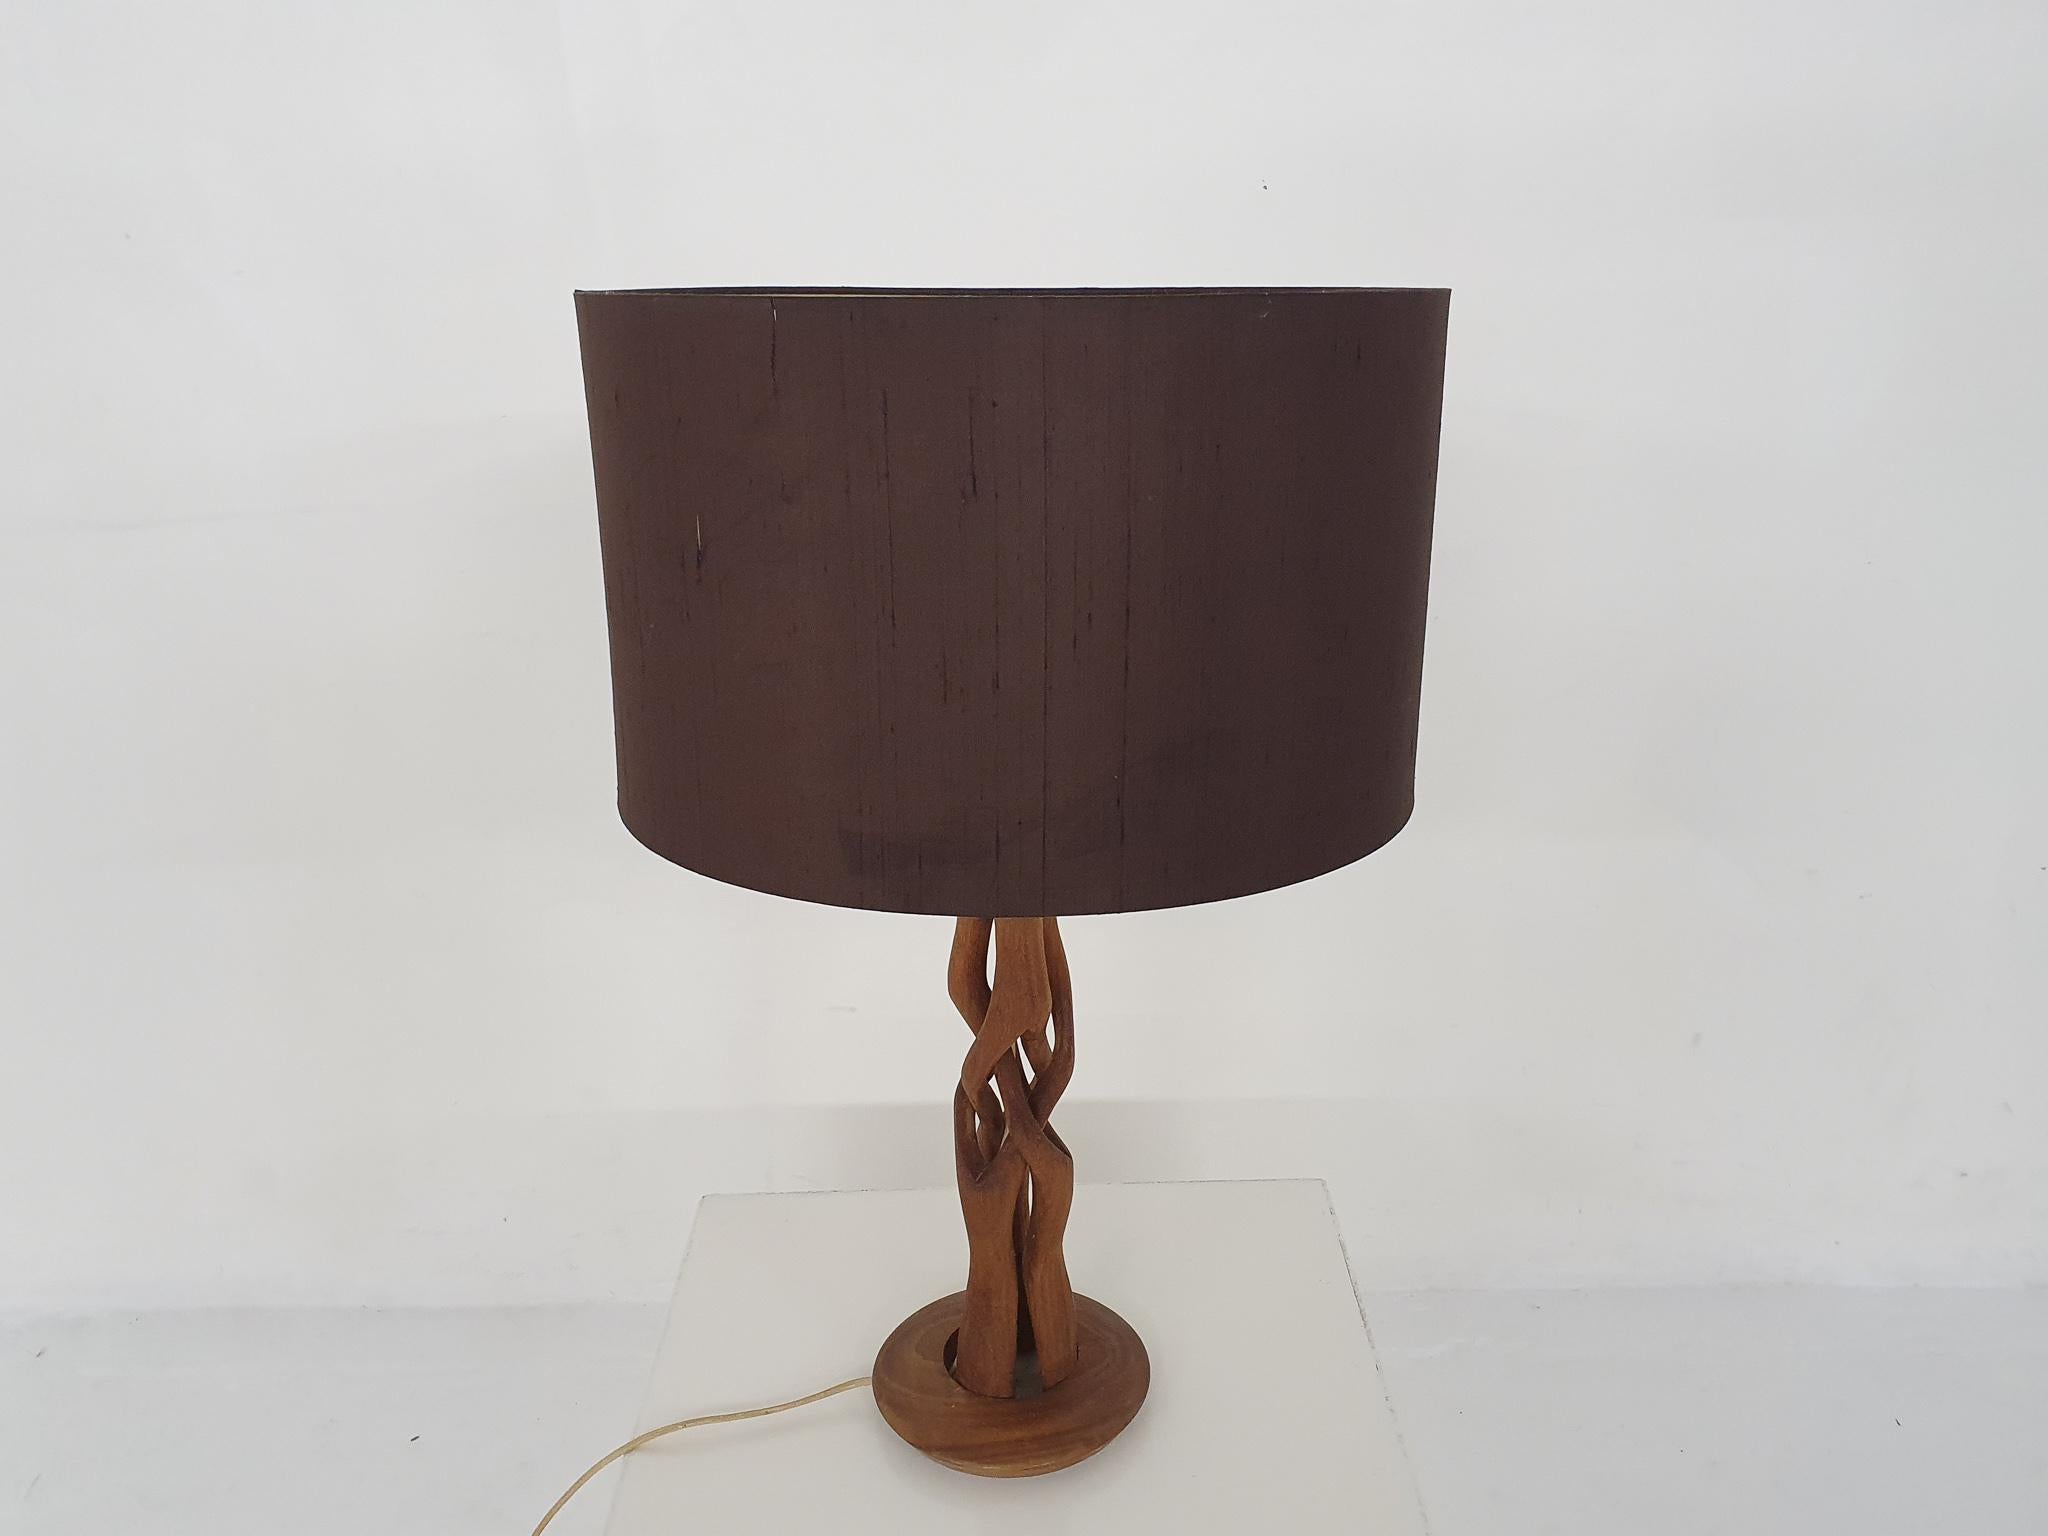 Nice organic wooden table light with brown lamp shade (not original)
With EU plug, one E27 fitting.